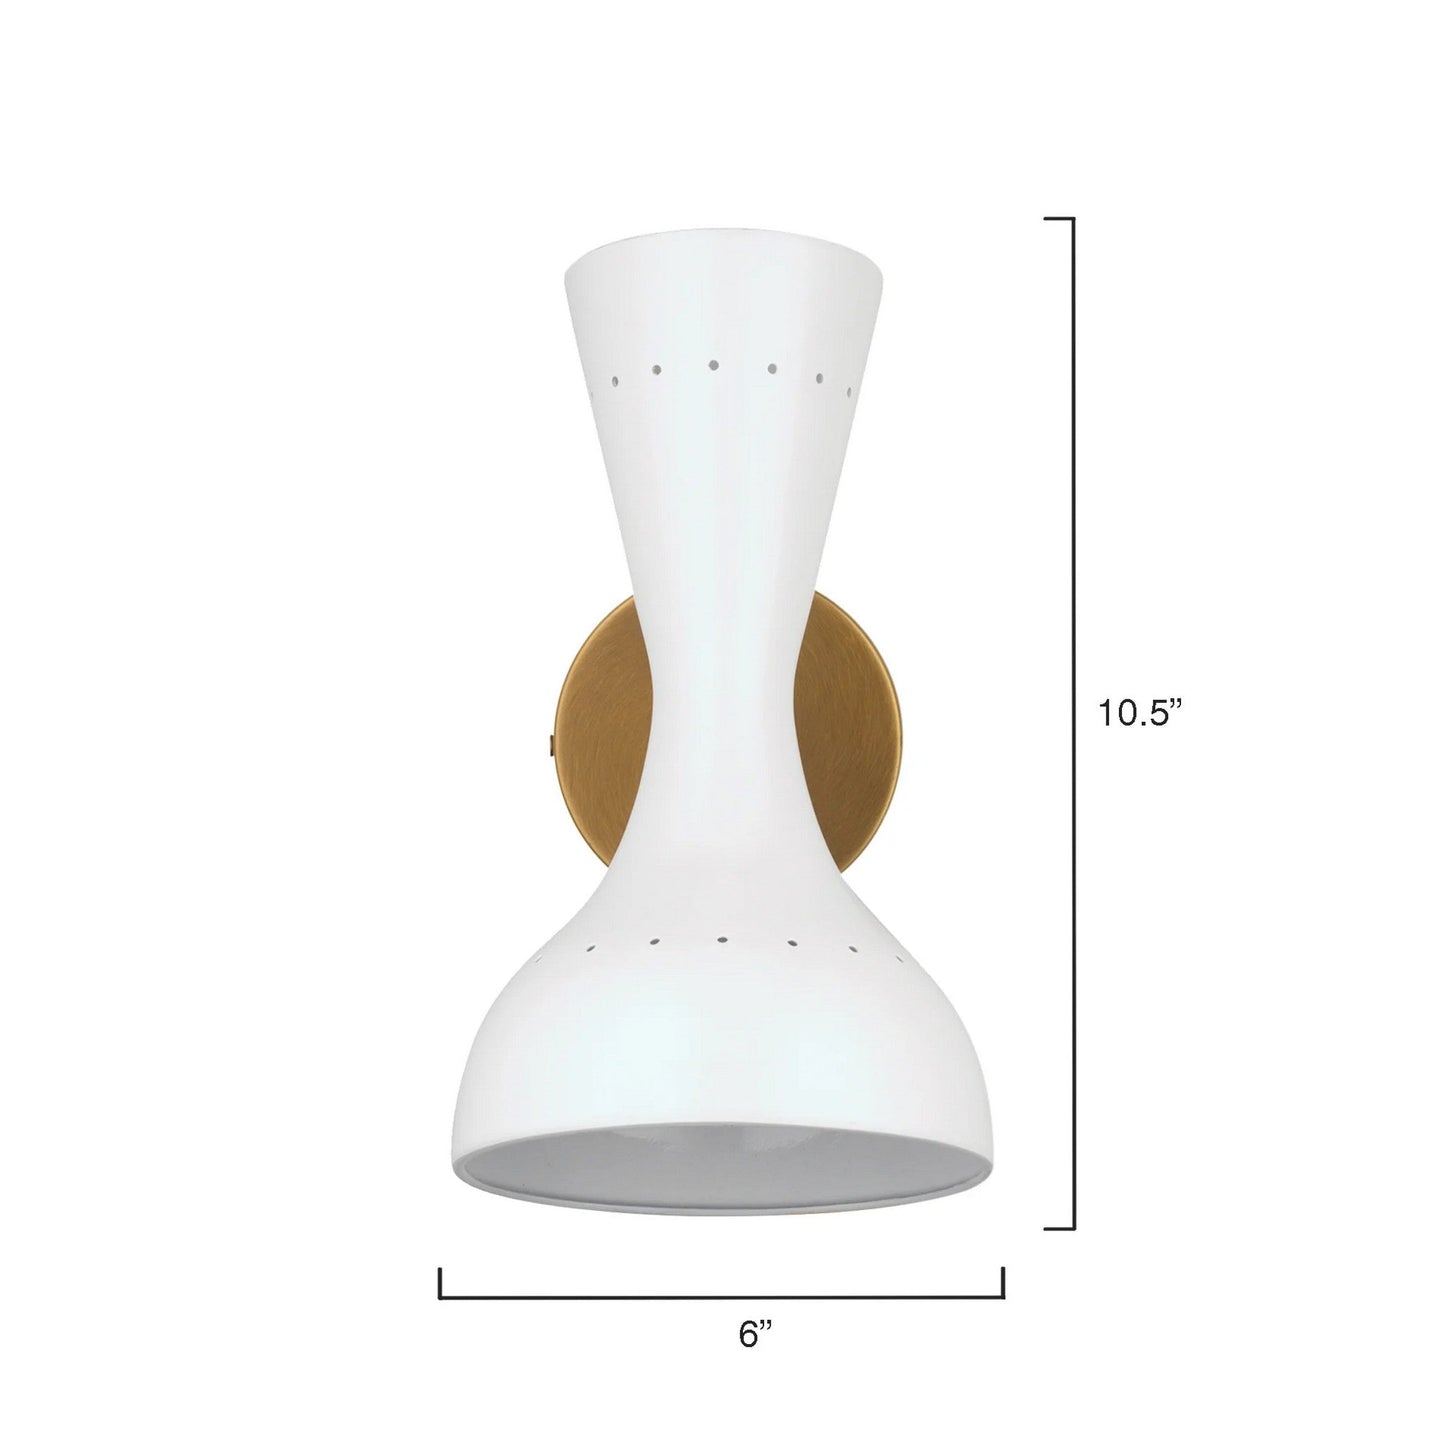 Jamie Young Pisa 6" x 11" 2-Light White and Antique Brass Metal Wall Sconce With Hourglass-Shaped Swivel Hood